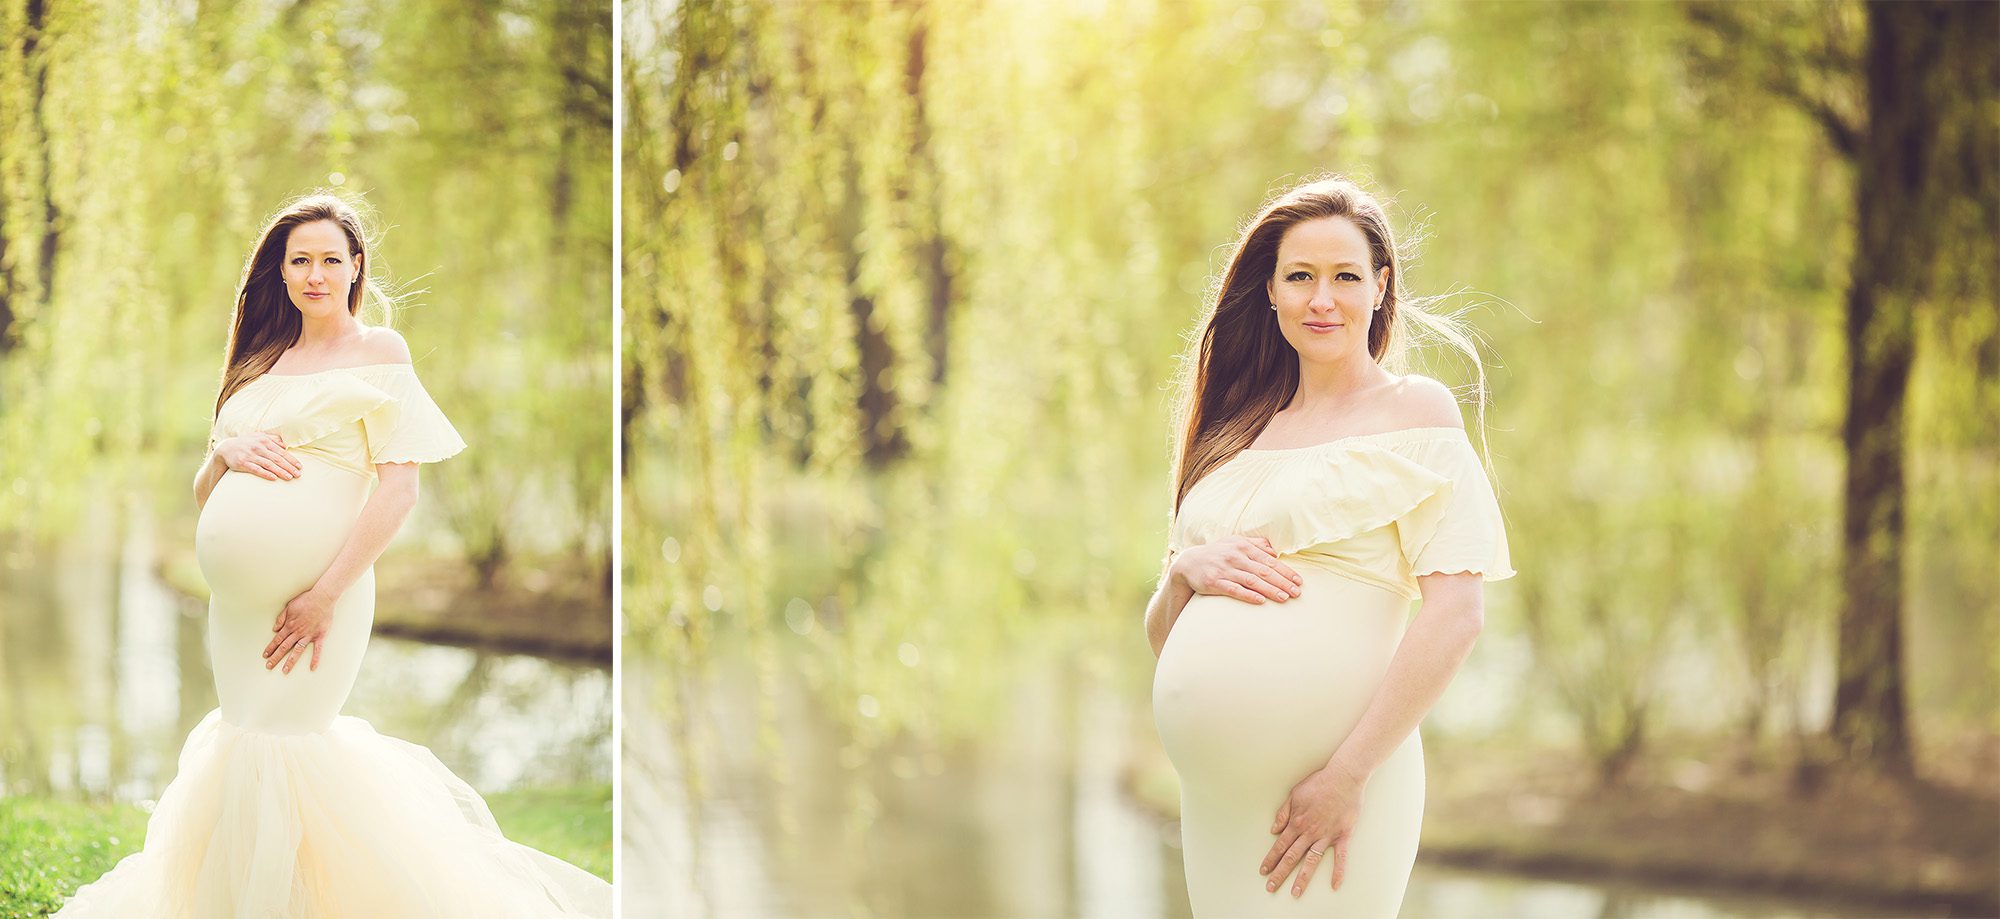 Tabitha is breathtaking in these sexy and glamorous maternity images.